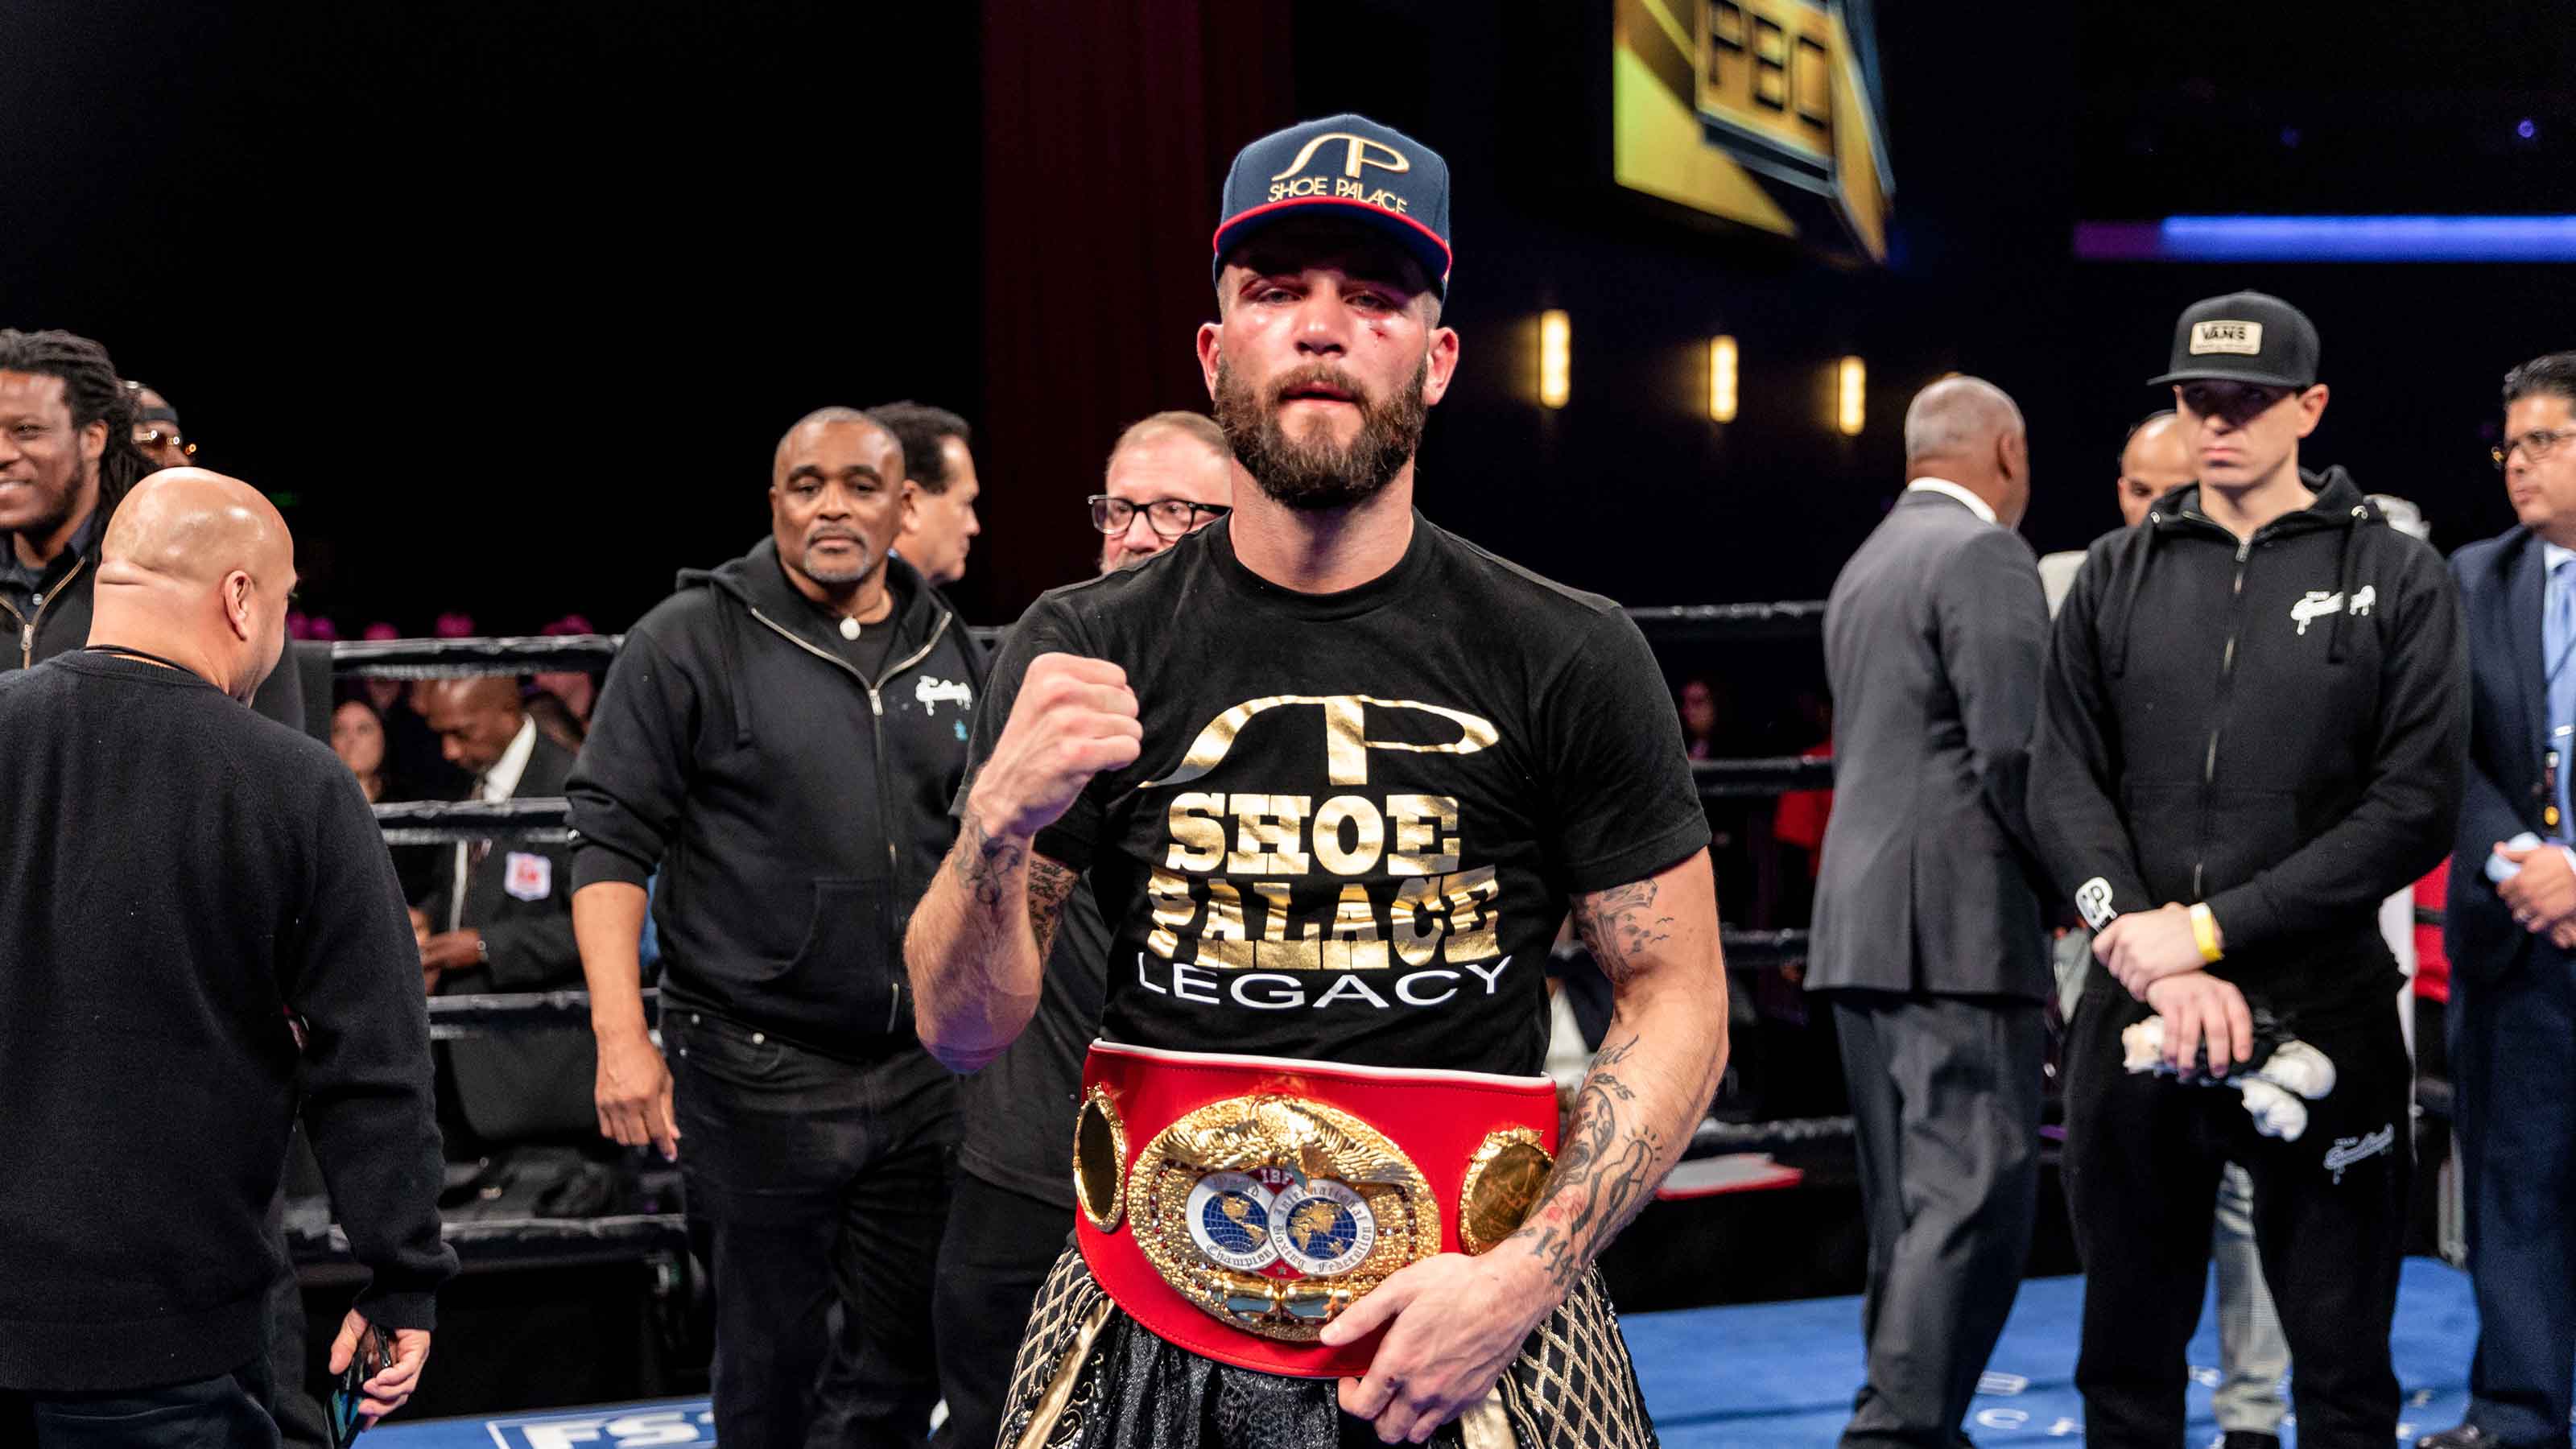 Caleb dominates Jose to capture the IBF super middleweight championship